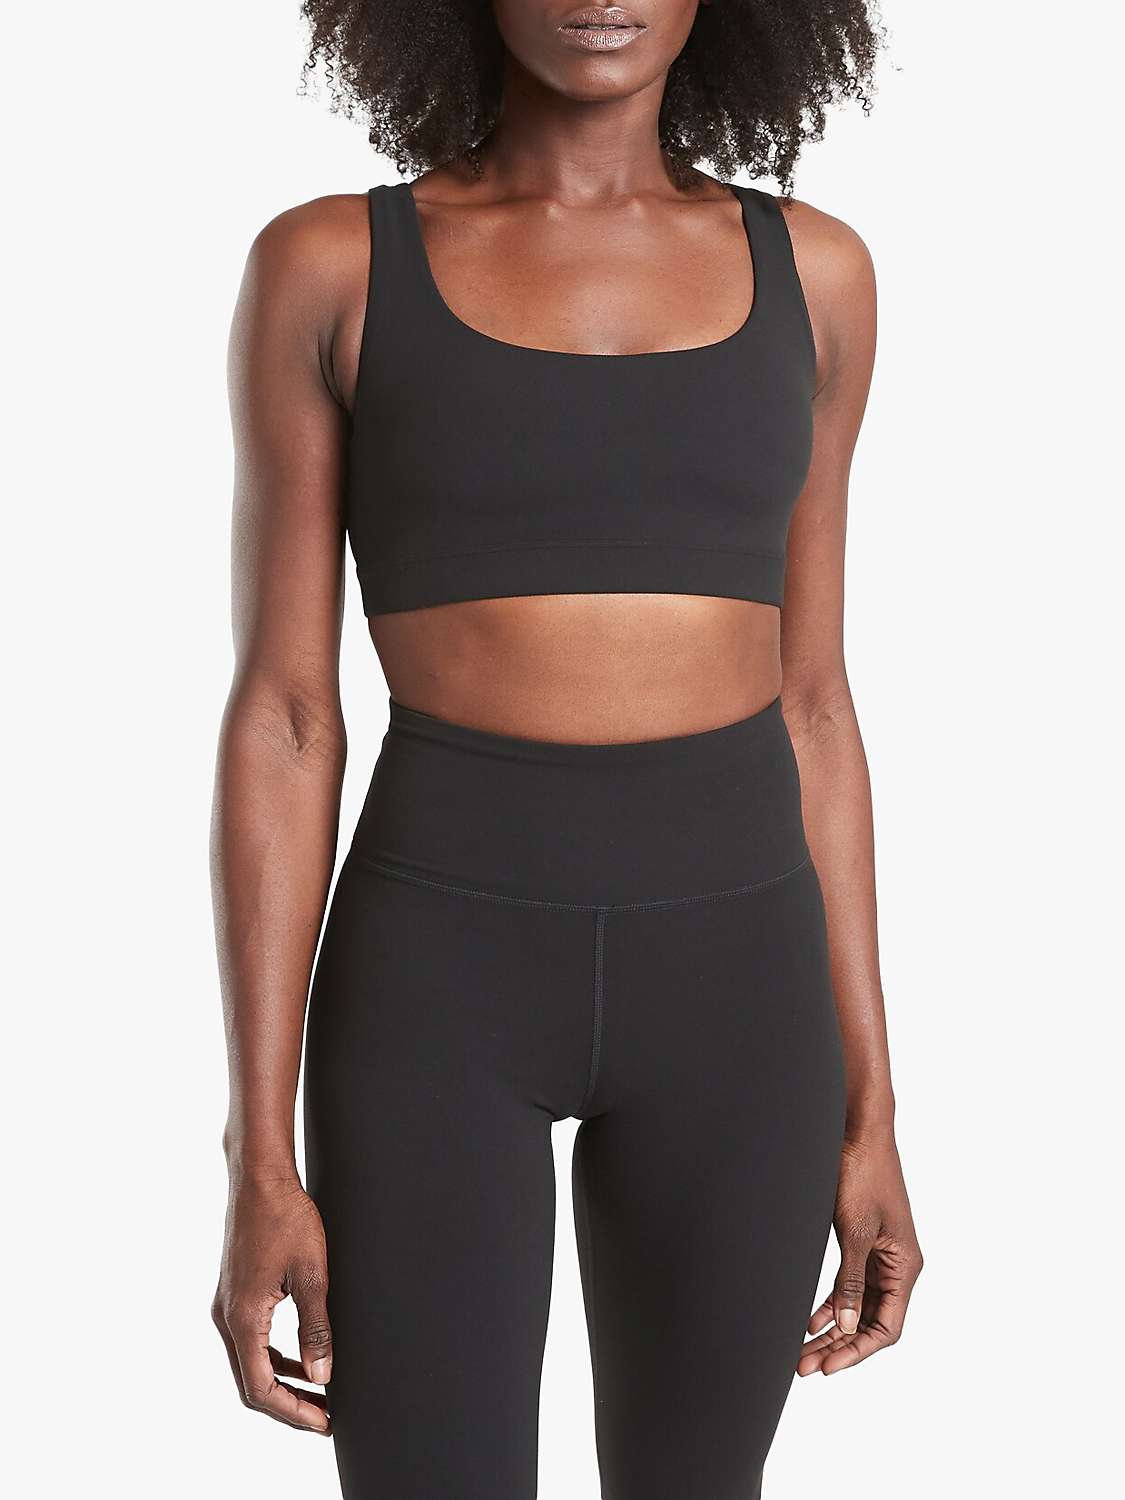 Buy Athleta Exhale Powervita A-C Cup Sports Bra Online at johnlewis.com